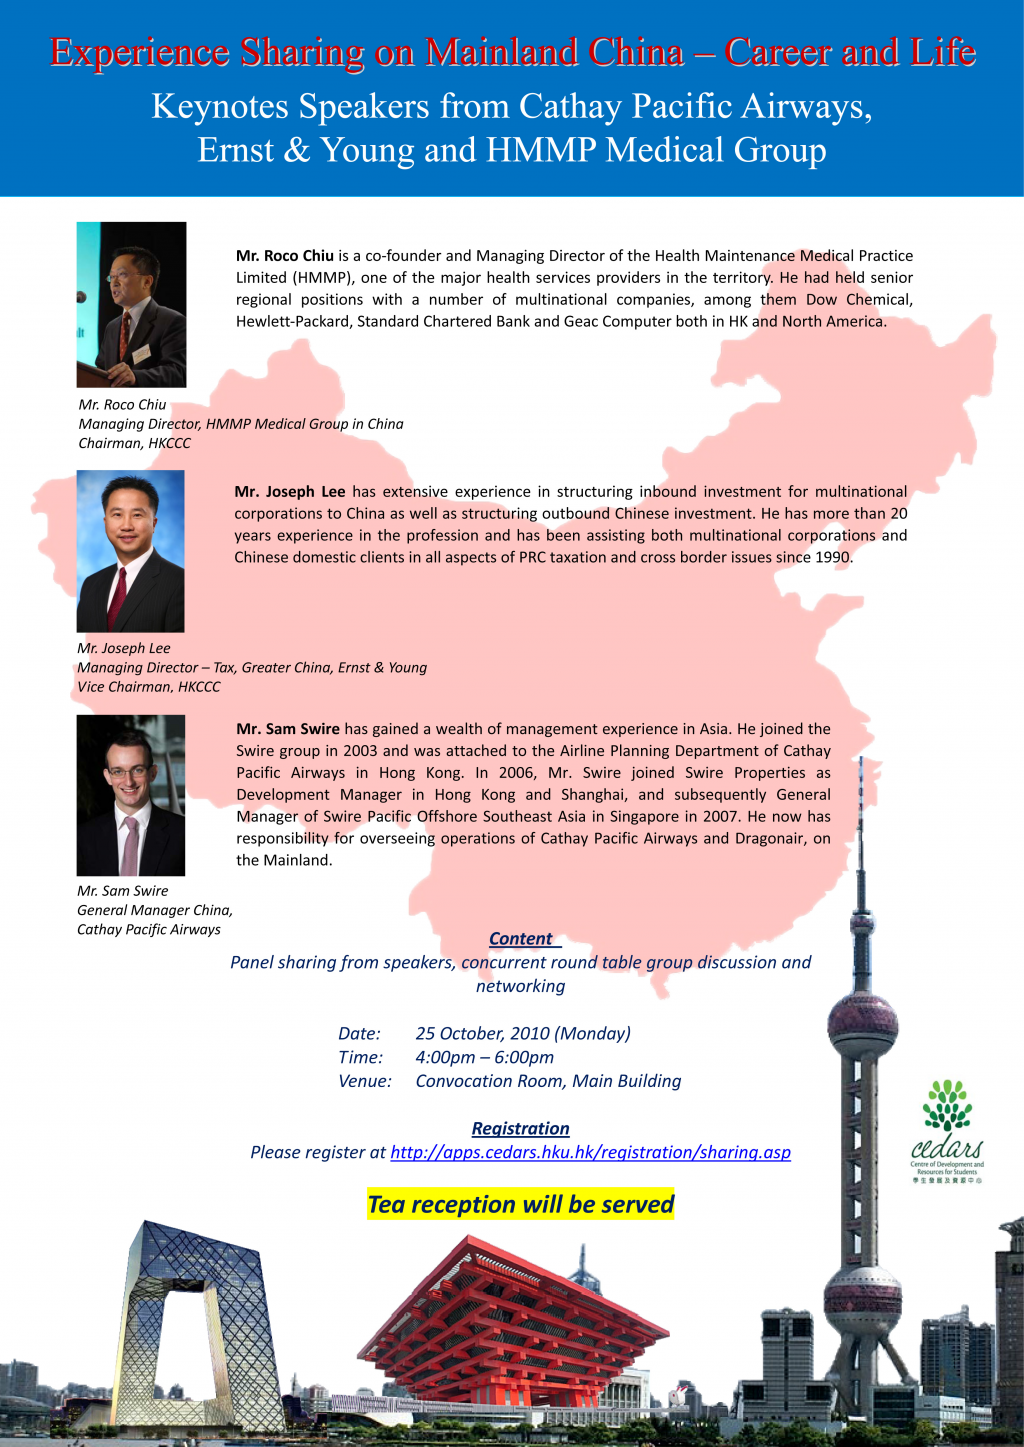 Experience Sharing on Mainland China: Career and Life